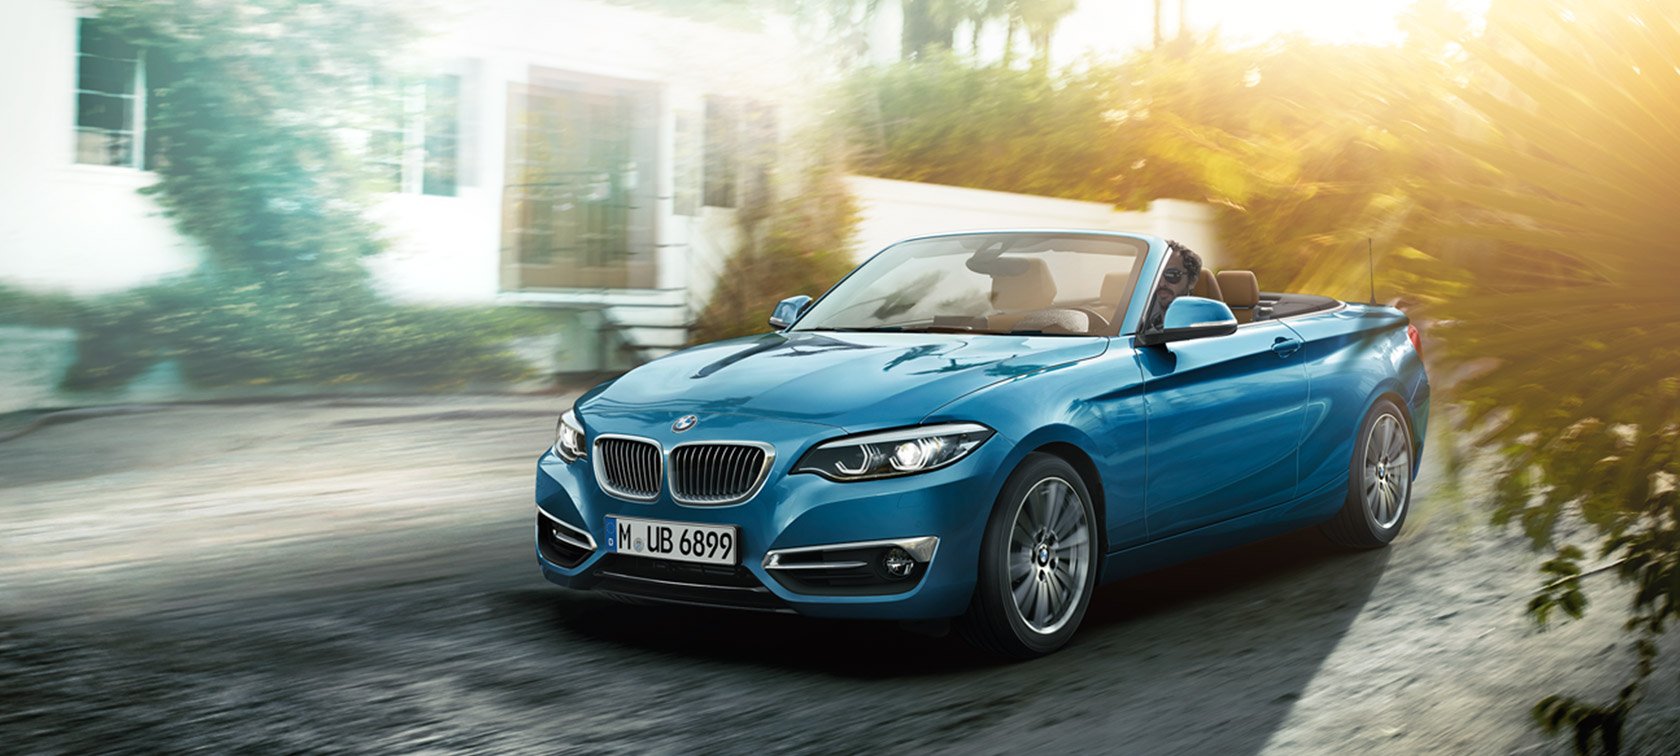 BrandZ Says BMW is 2nd Most Valuable Car Brand